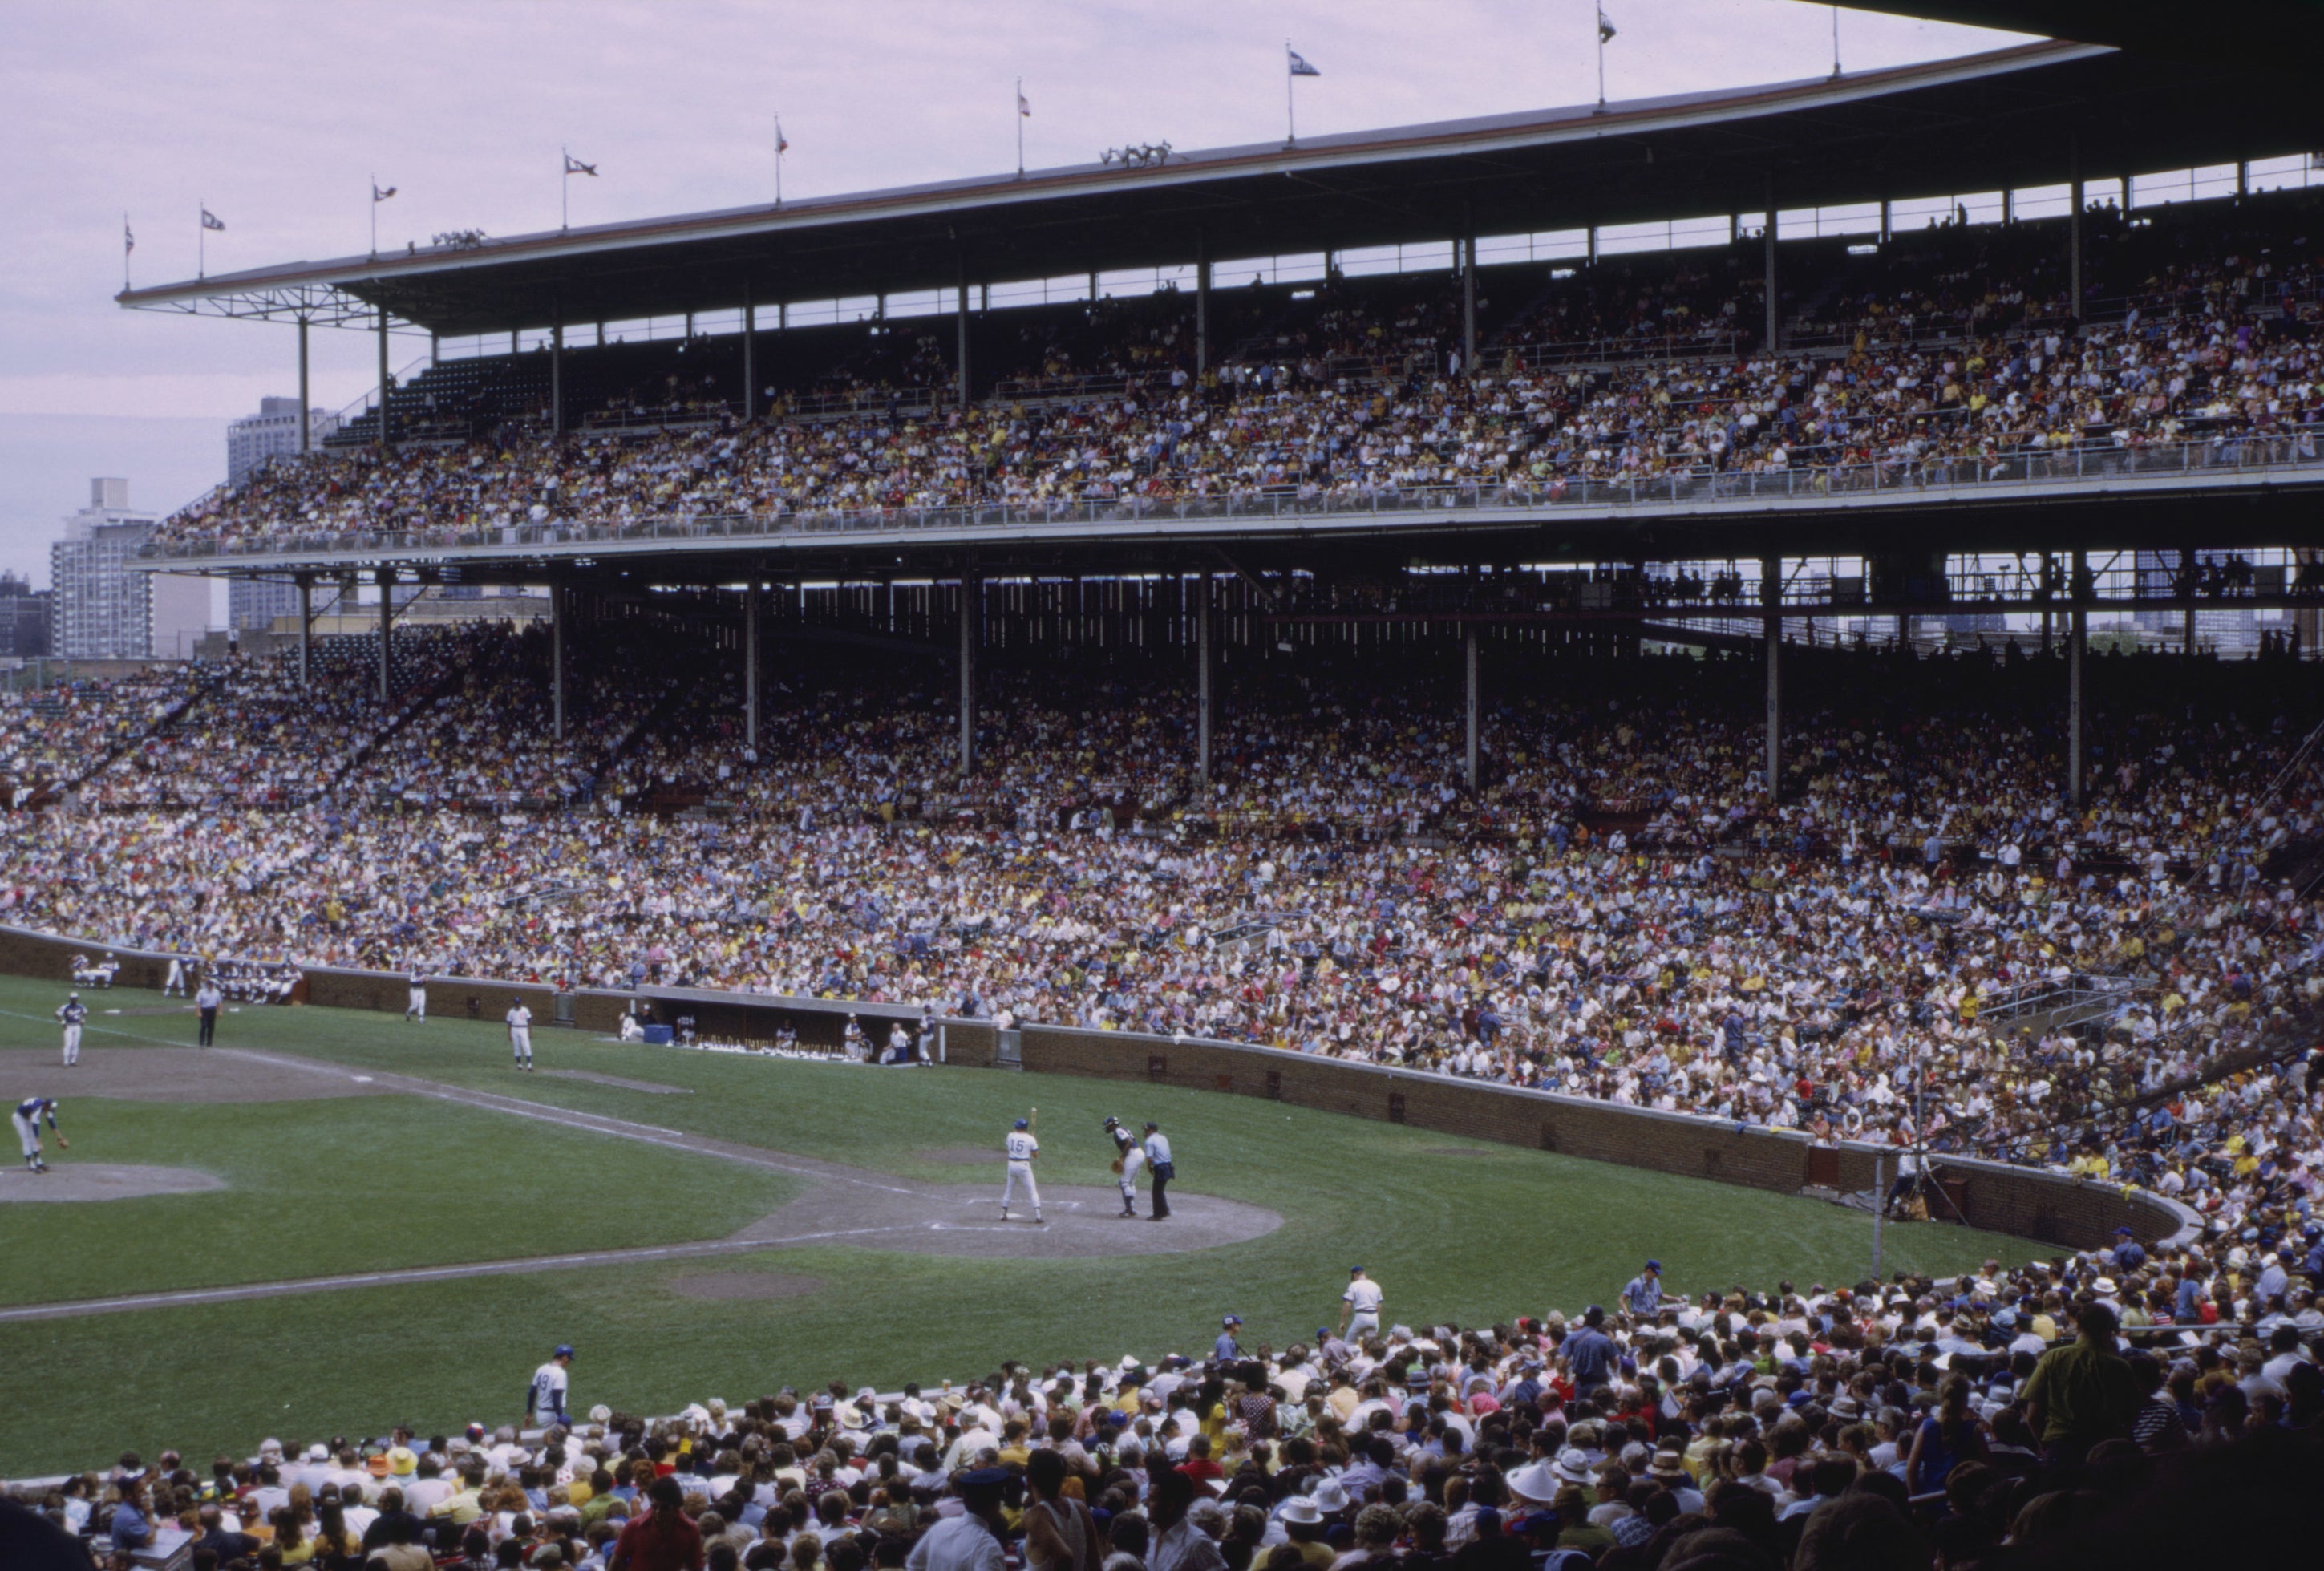 Wrigley Field is pictured during a 1972 game